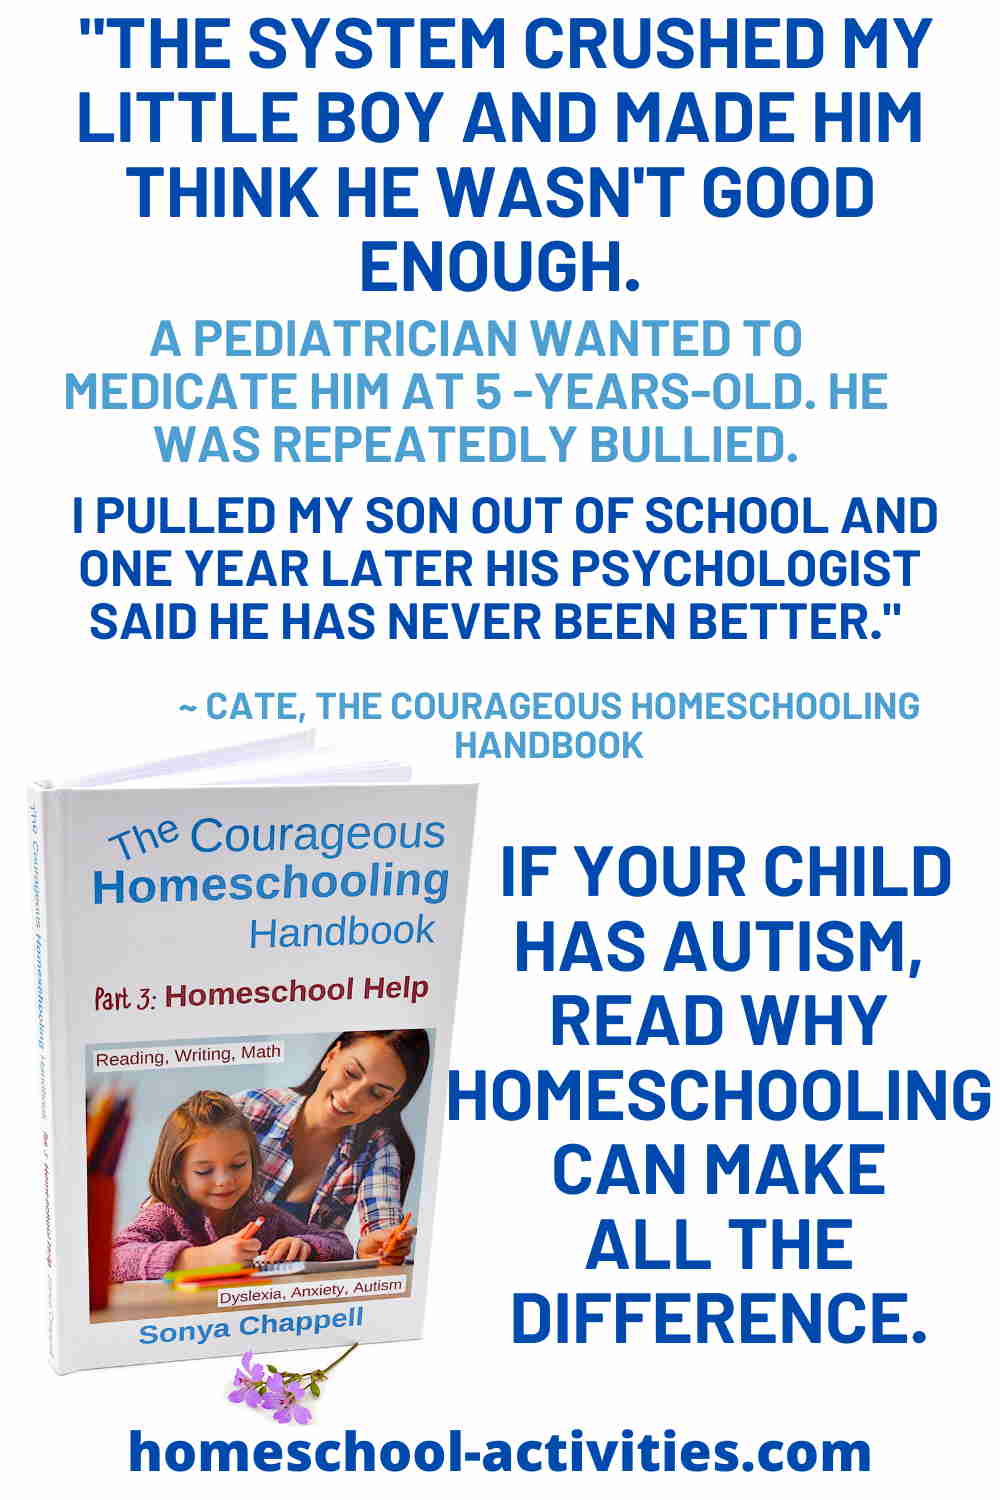 The Courageous Homeschooling Handbook with help and advice about homeschooling with autism.